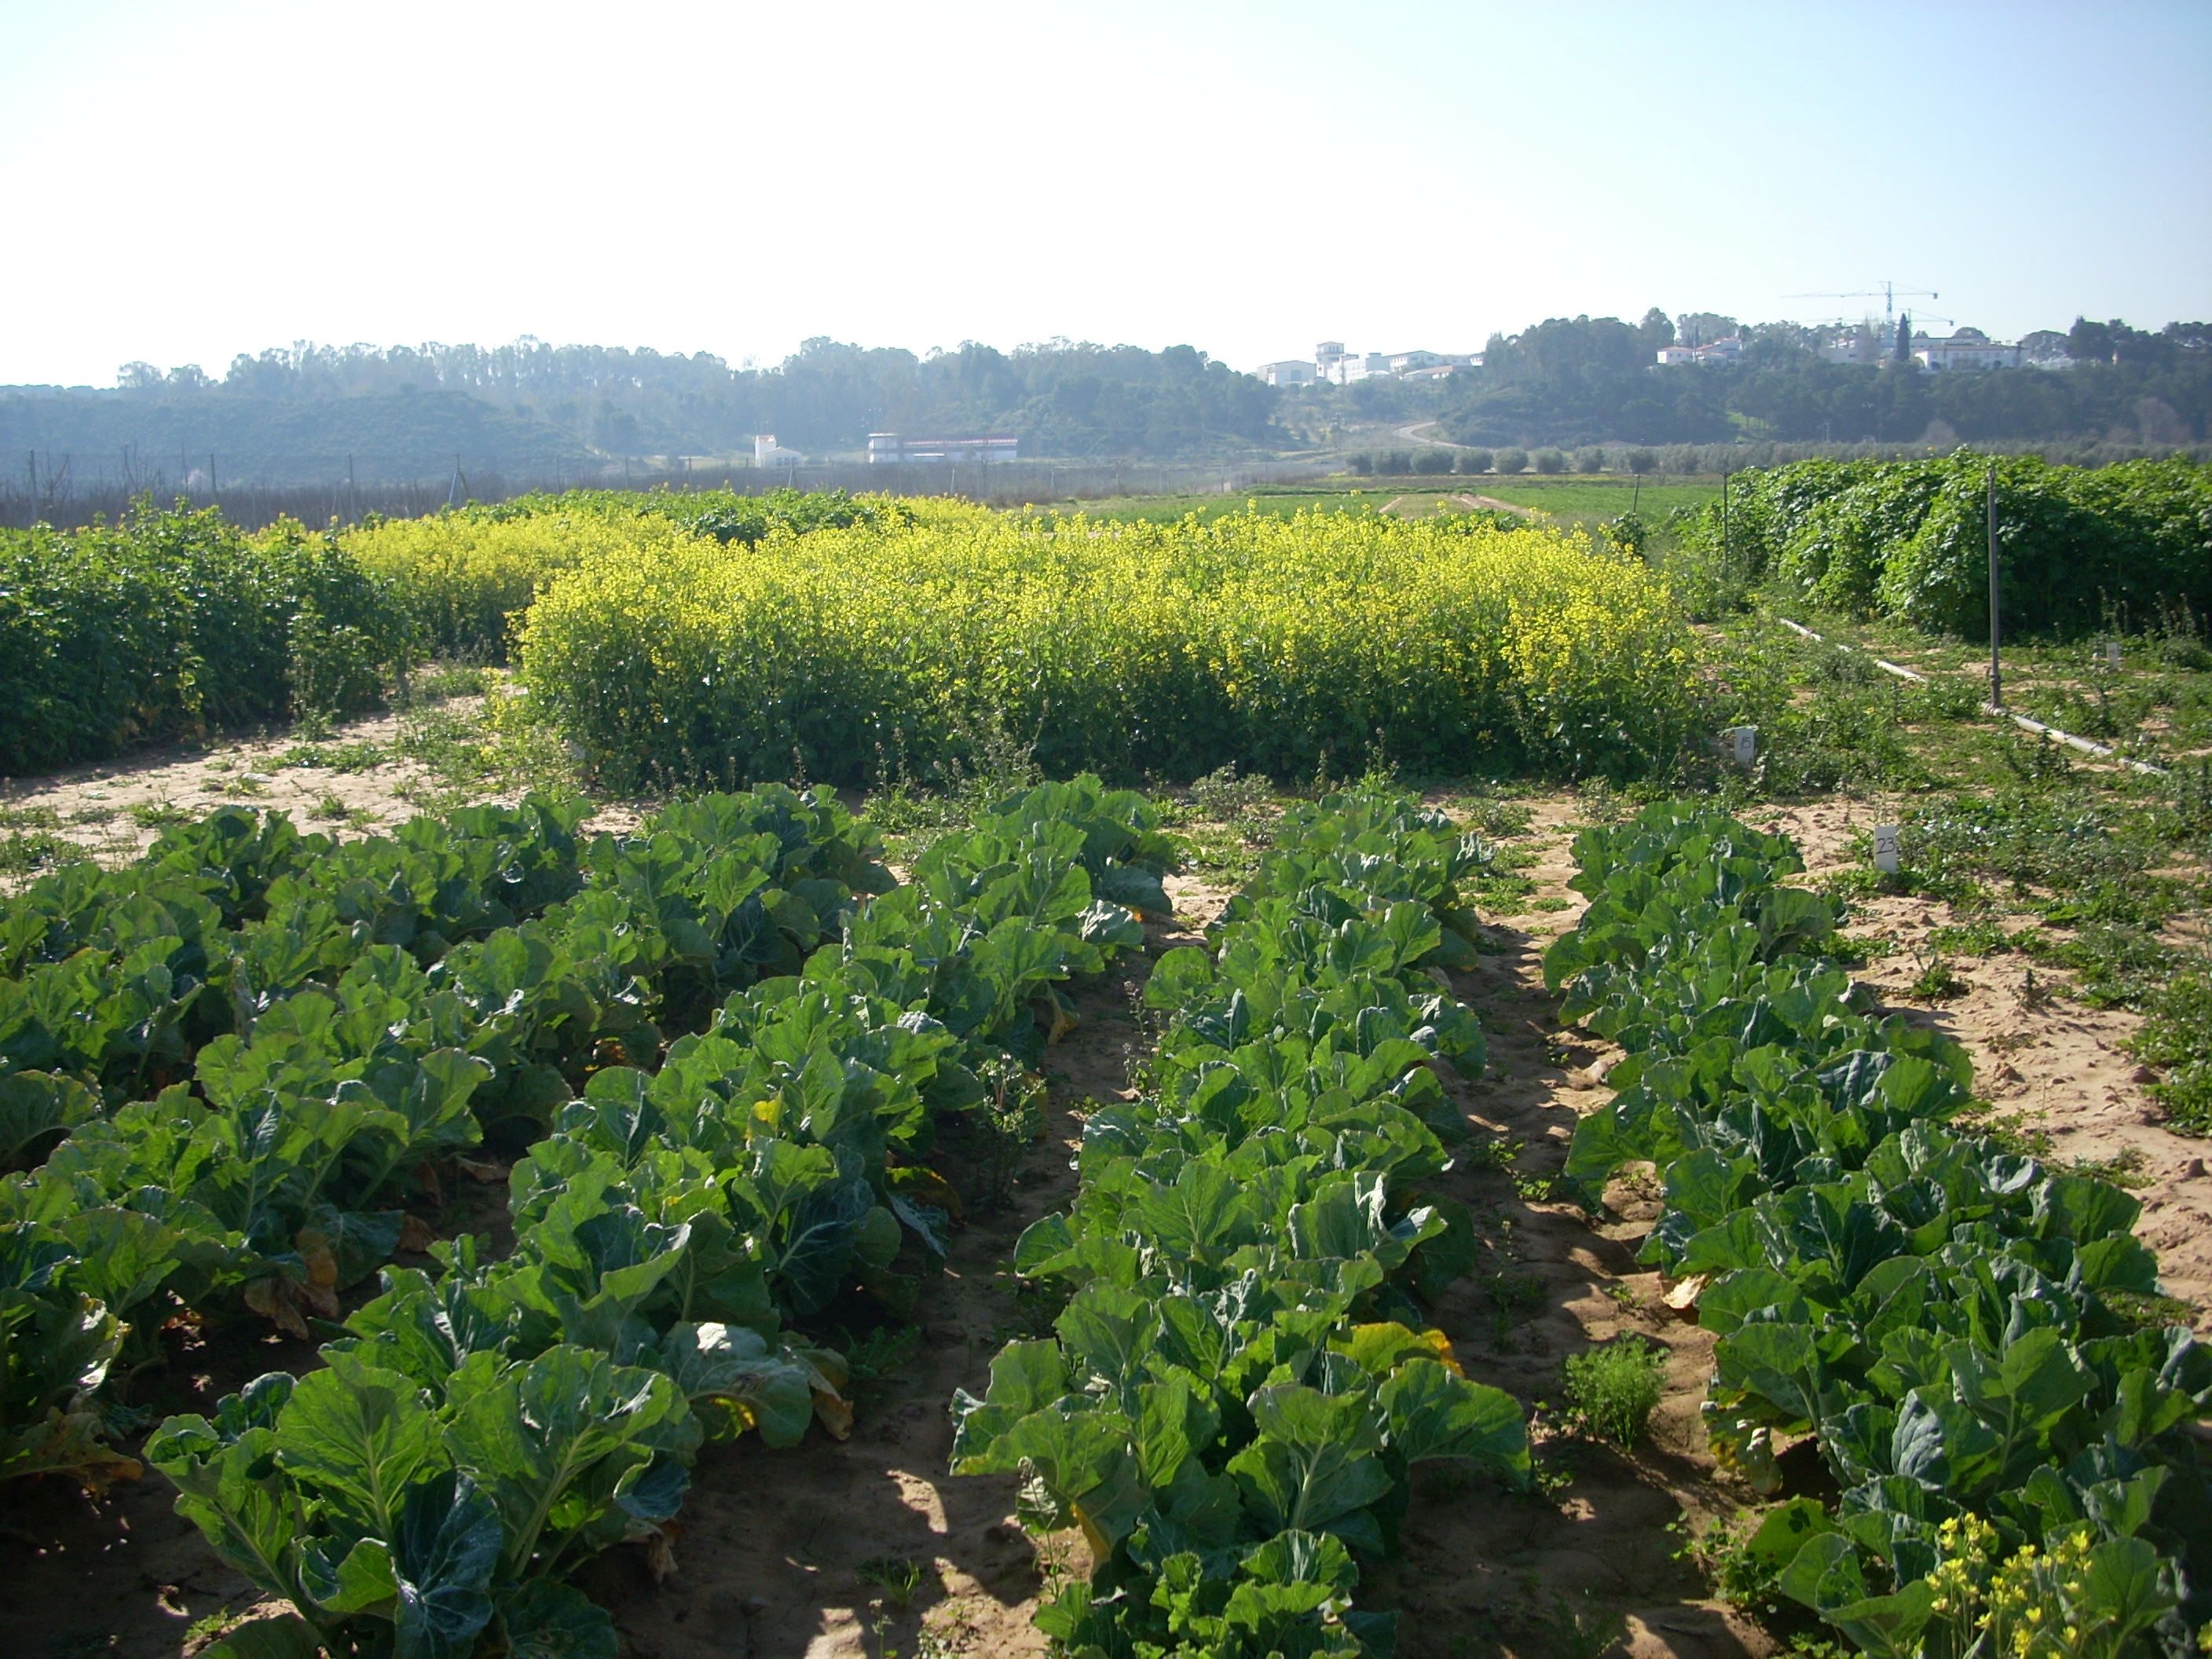 Cultivation of crucifers for biofumigation